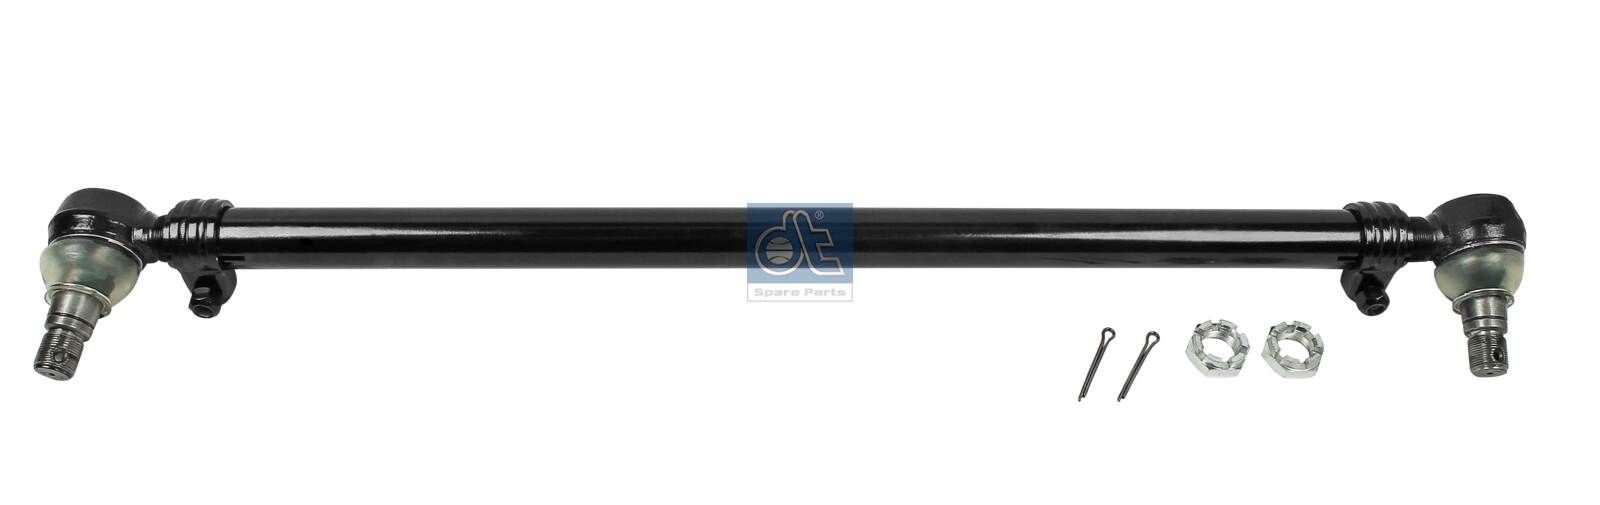 DT Spare Parts Cone Size: 30mm, Length: 880mm Tie Rod 4.65664 buy